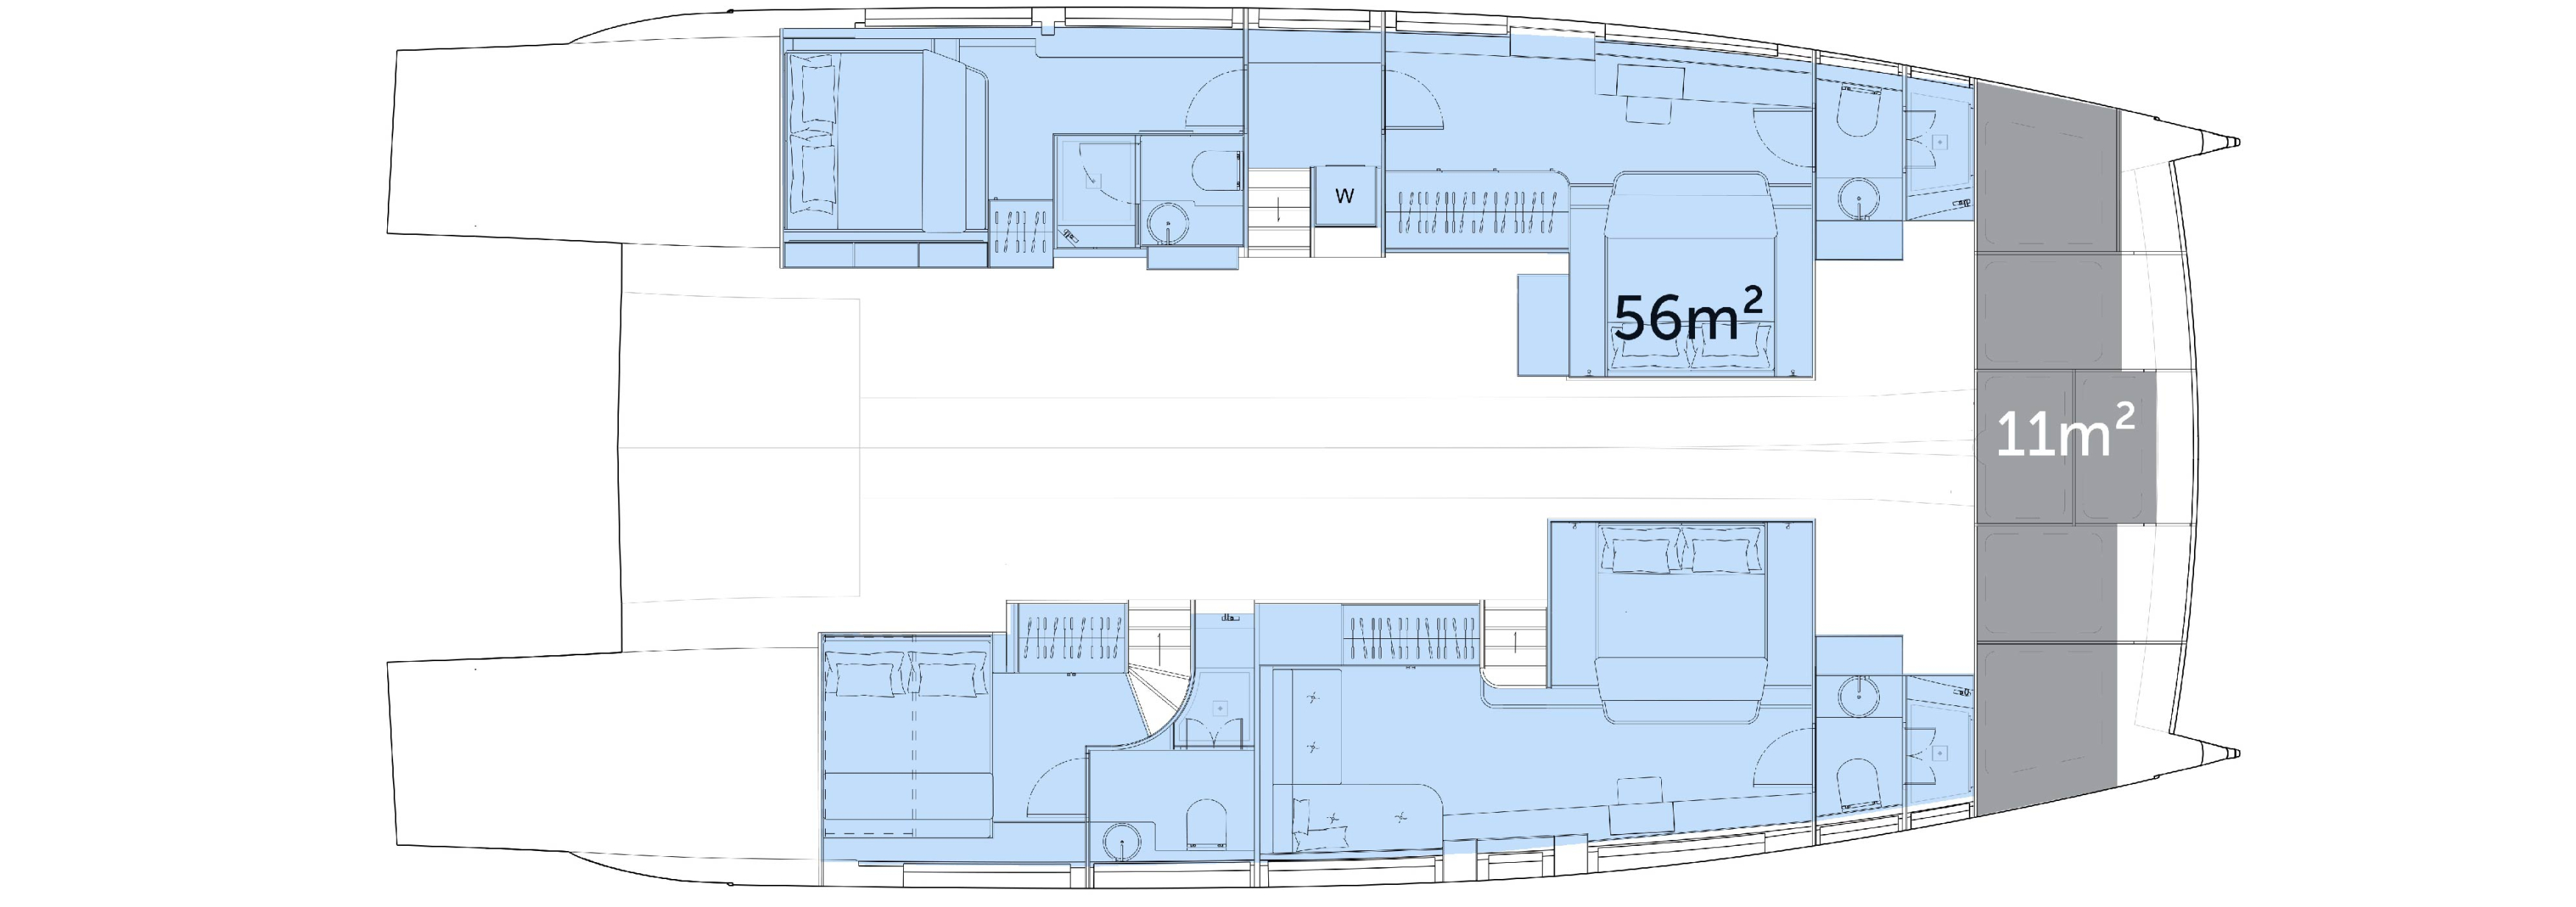 Yacht lower deck front exit area plan